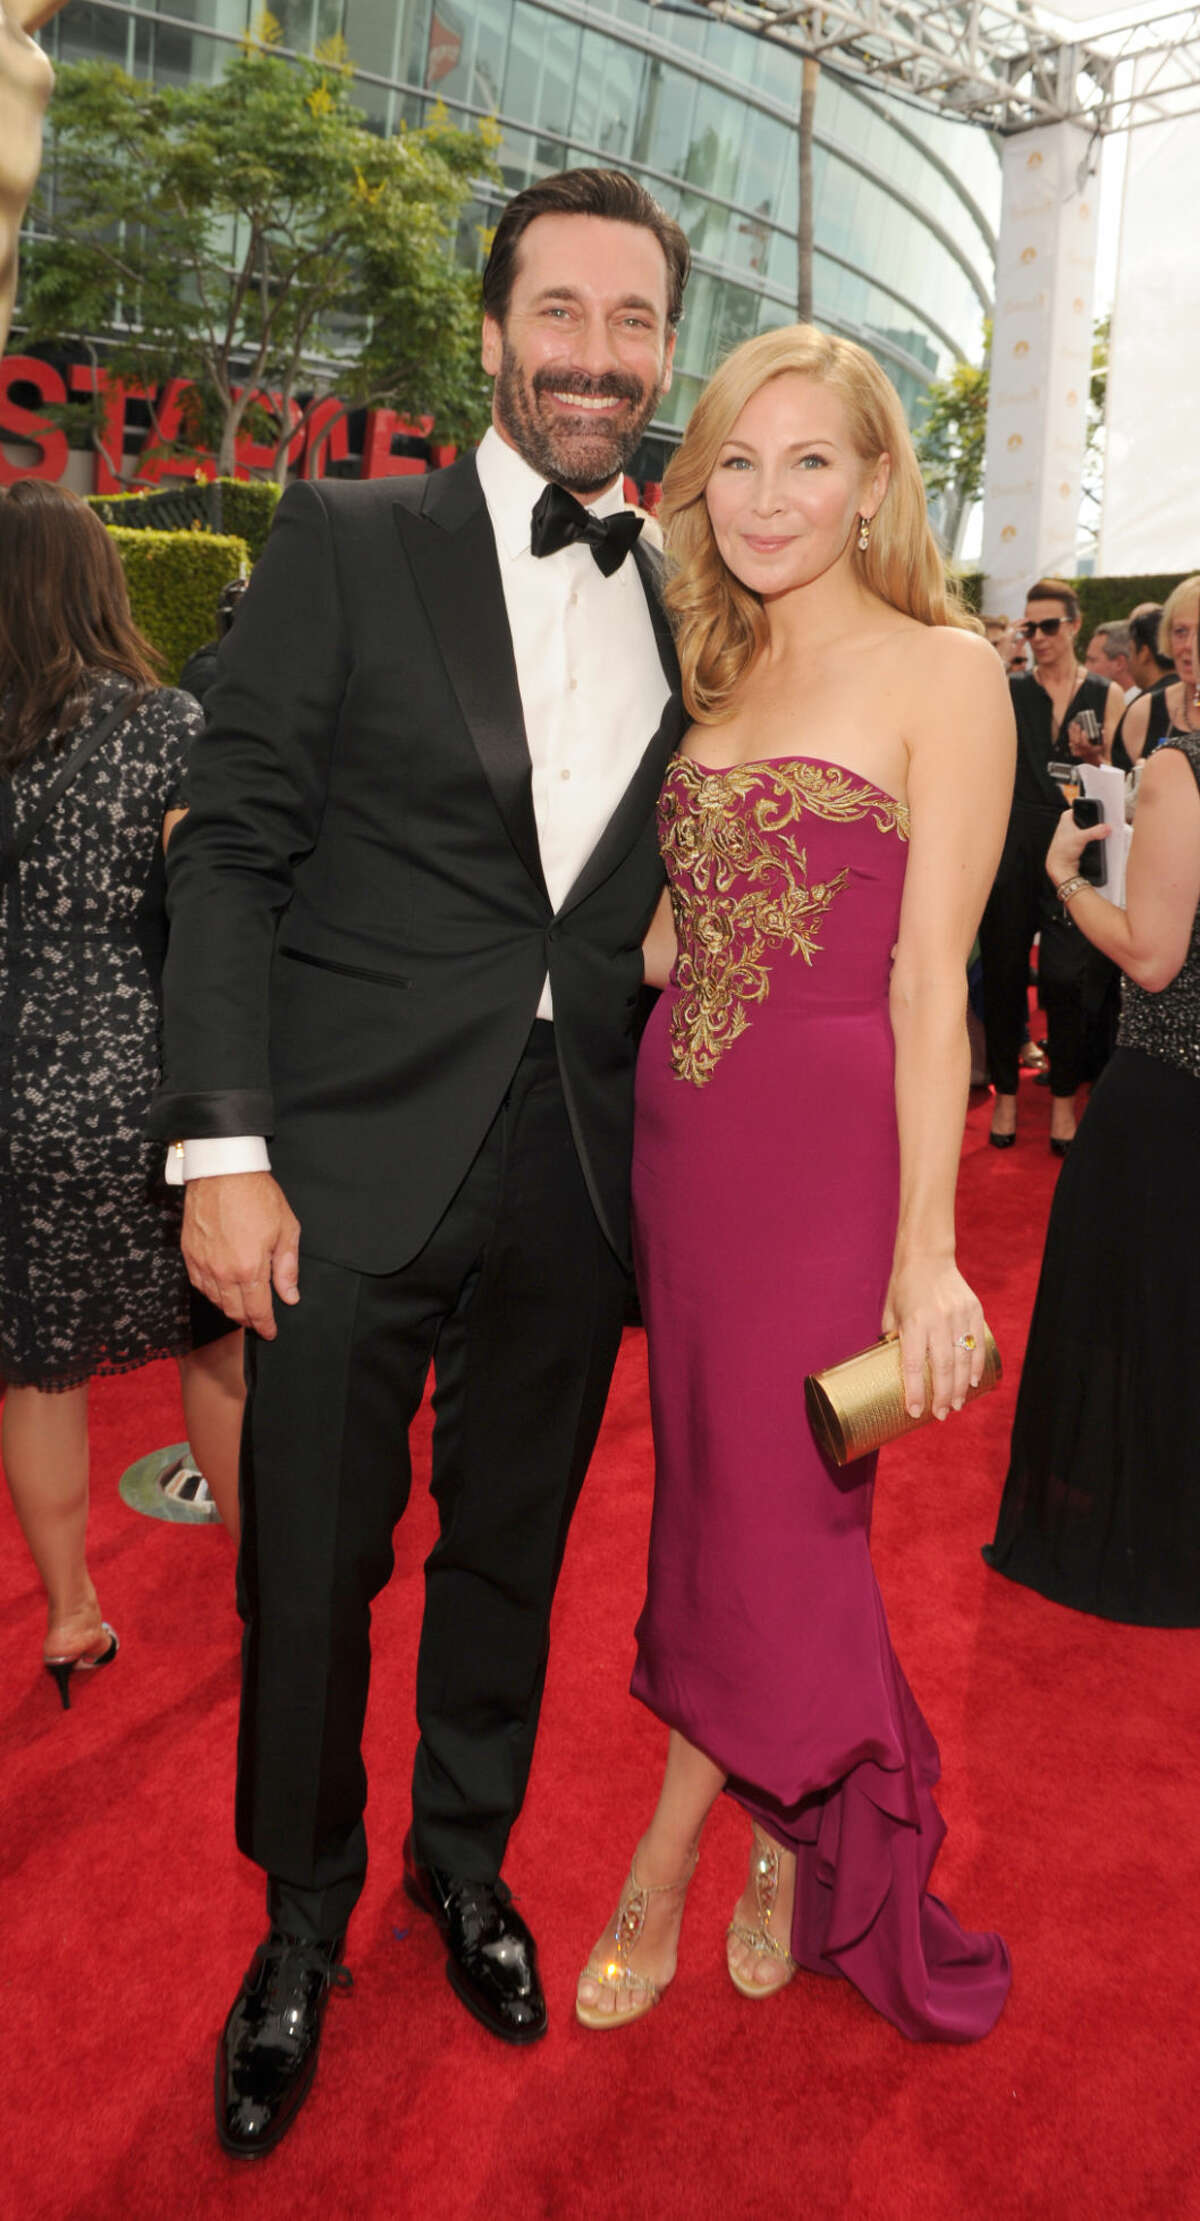 IMAGE DISTRIBUTED FOR THE TELEVISION ACADEMY - Actor Jon Hamm, left, and actress Jennifer Westfeldt arrive at the 66th Primetime Emmy Awards at the Nokia Theatre L.A. Live on Monday, Aug. 25, 2014, in Los Angeles. (Photo by Frank Micelotta/Invision for the Television Academy/AP Images)